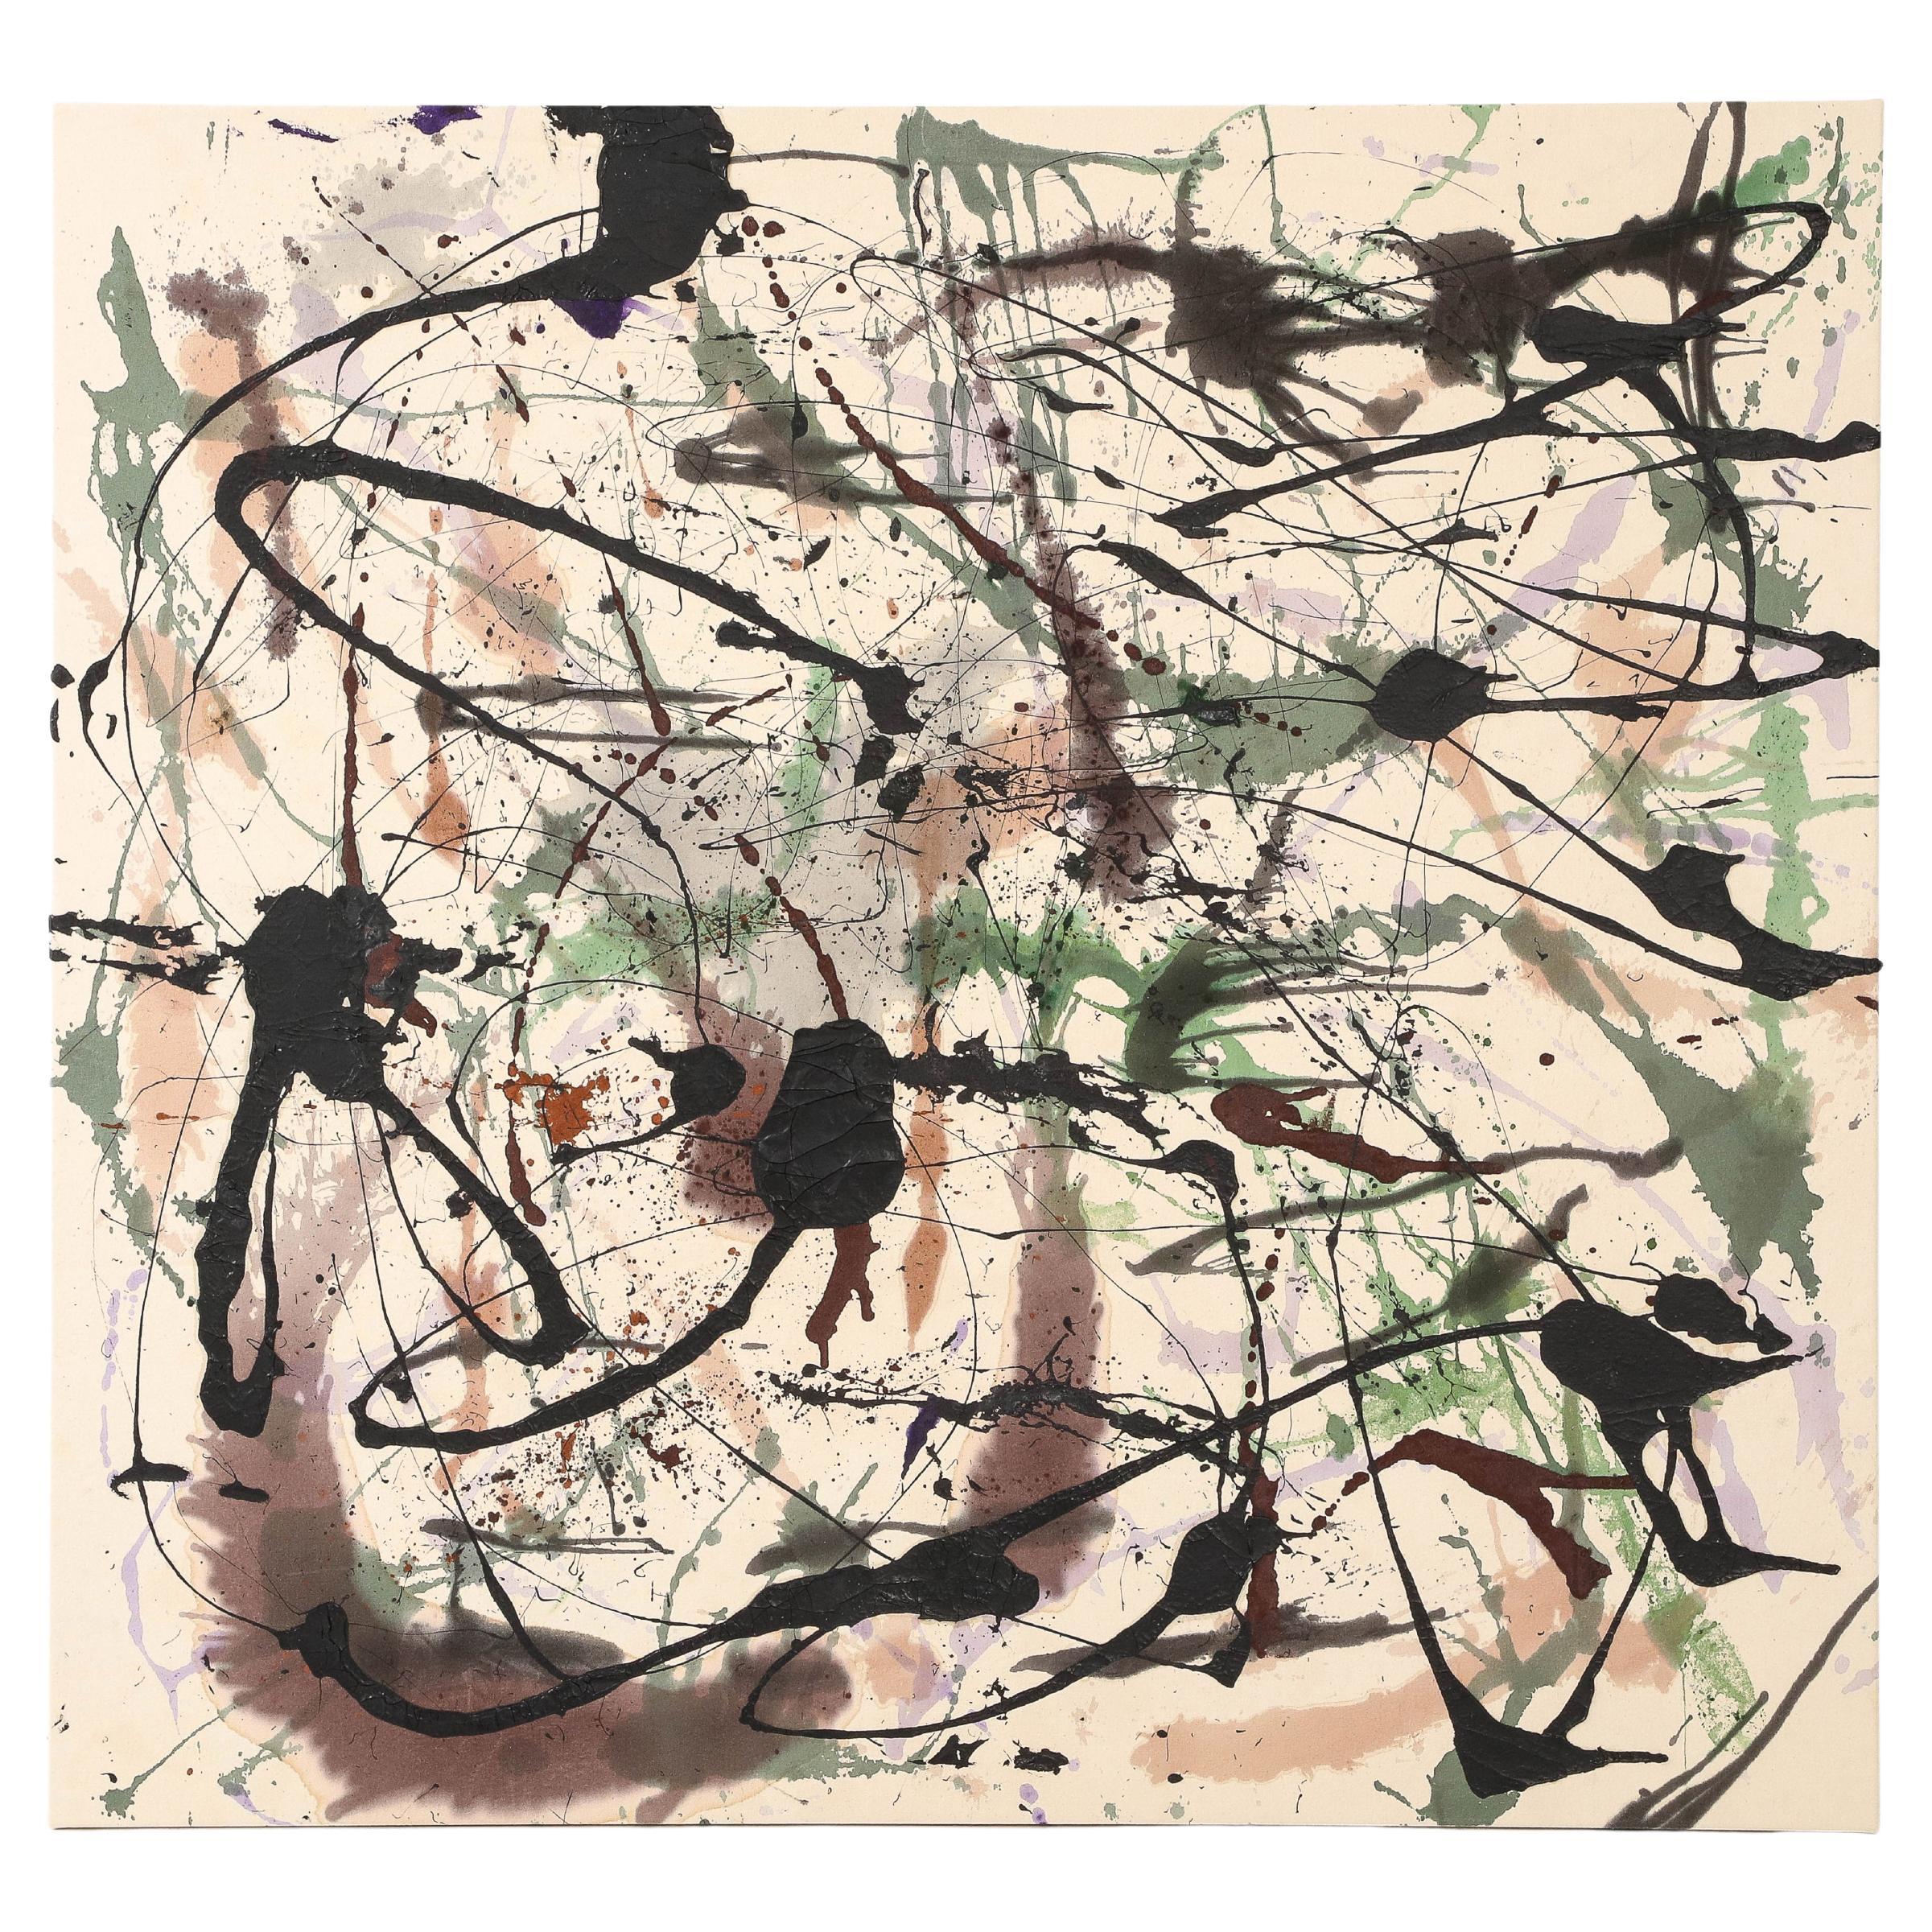 Jackson Pollock Style Artwork By Woodstock, NY Artist For Sale